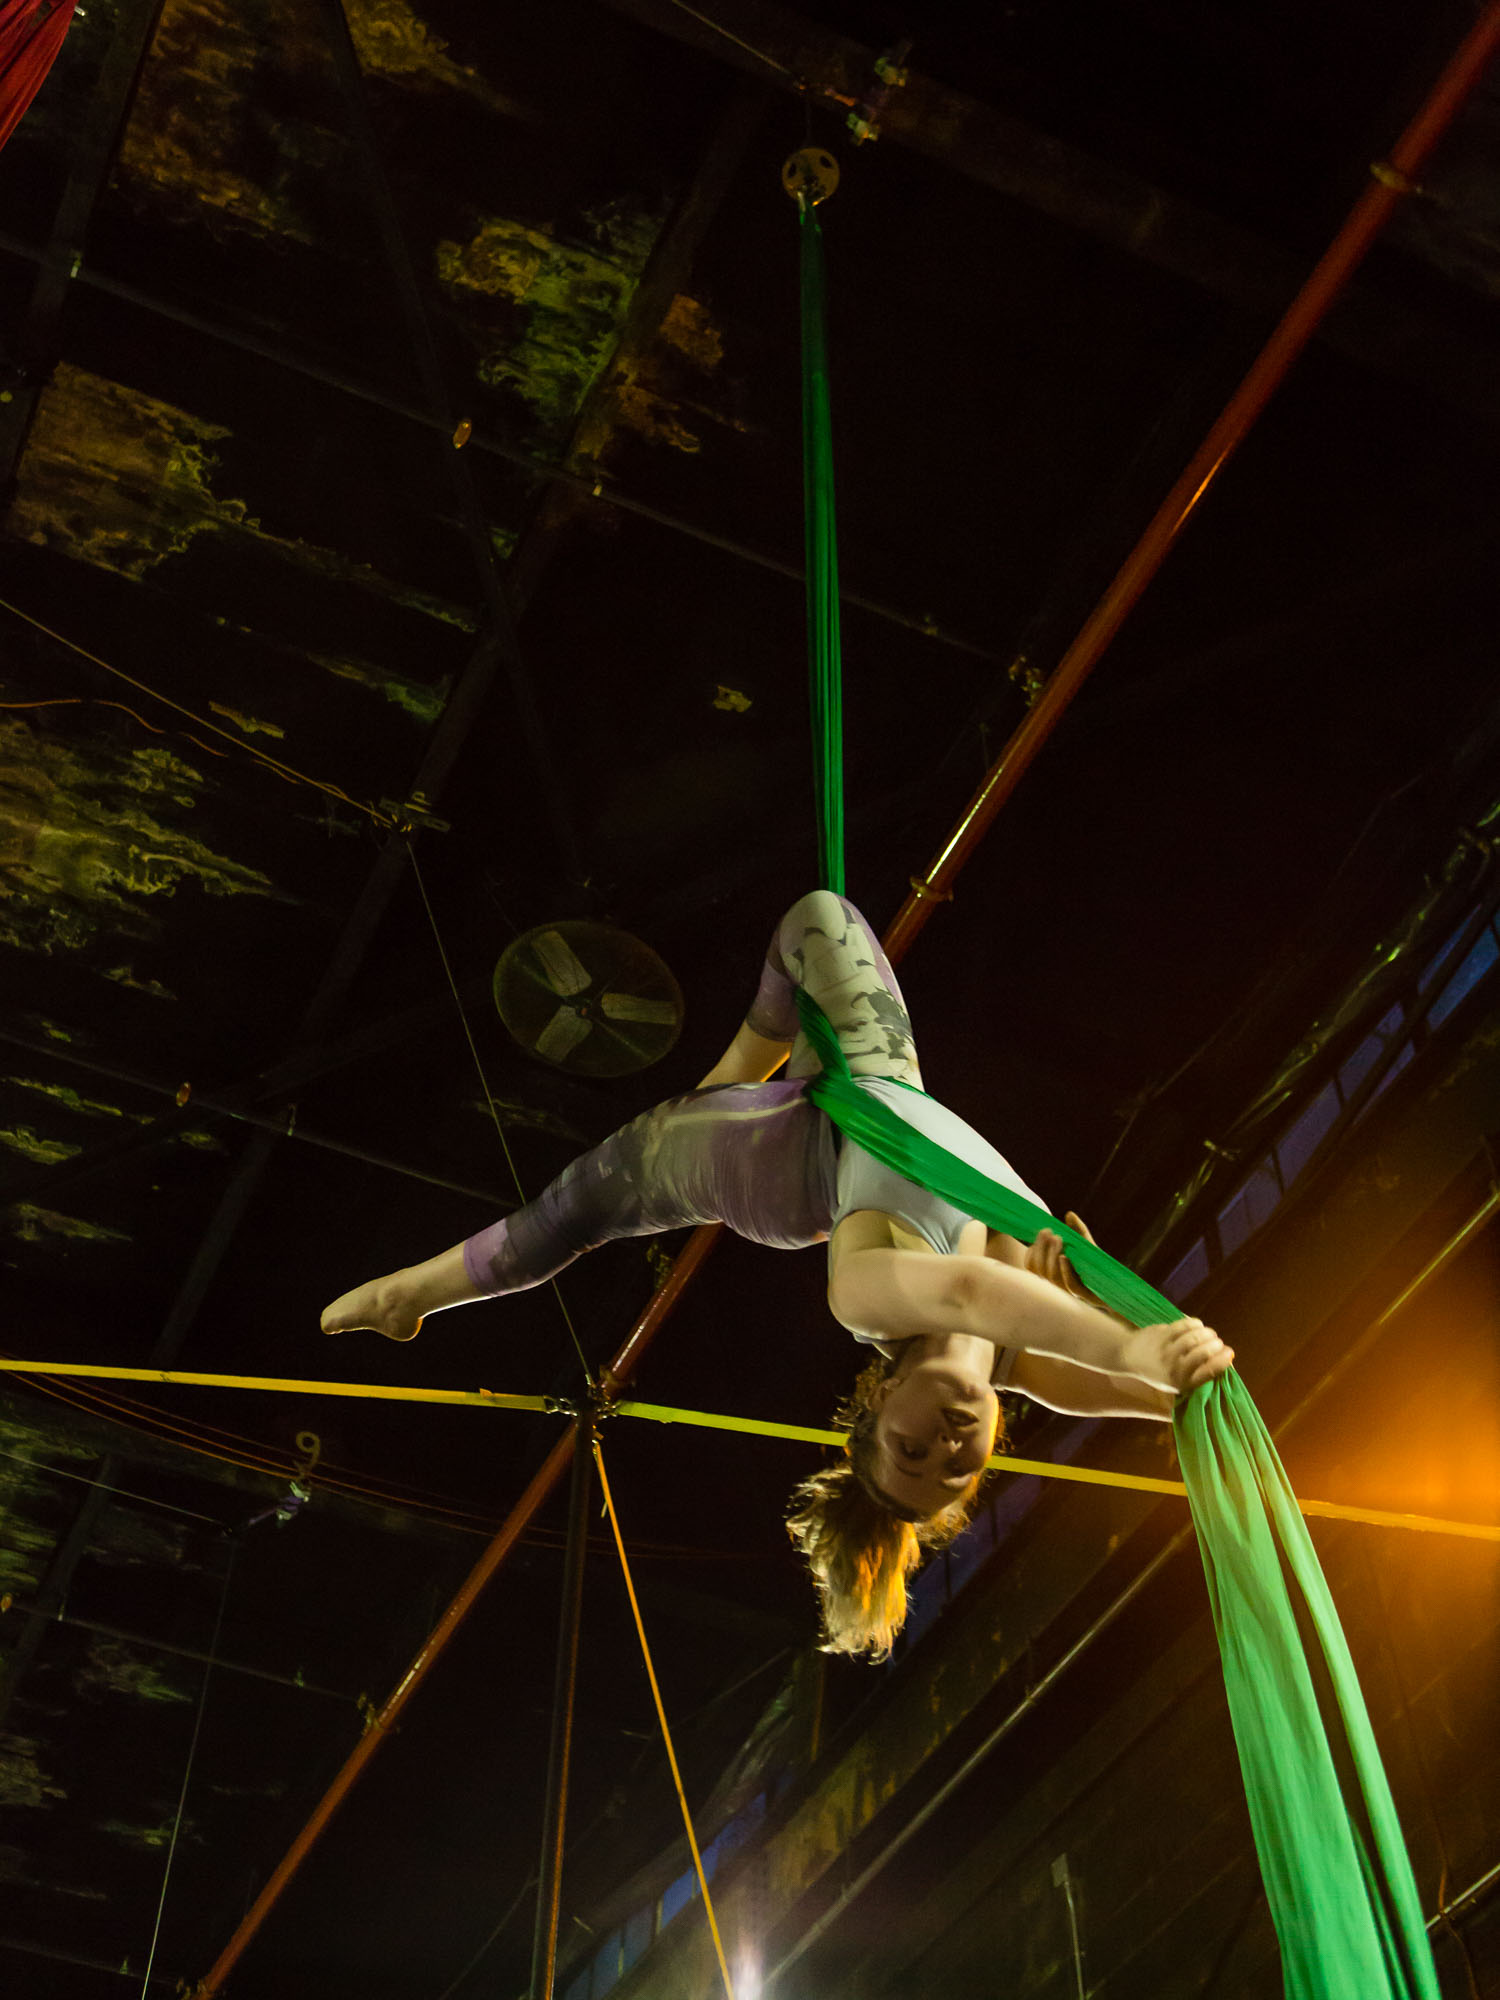 An acrobatic woman upside down on the aerial silks at The Muse.